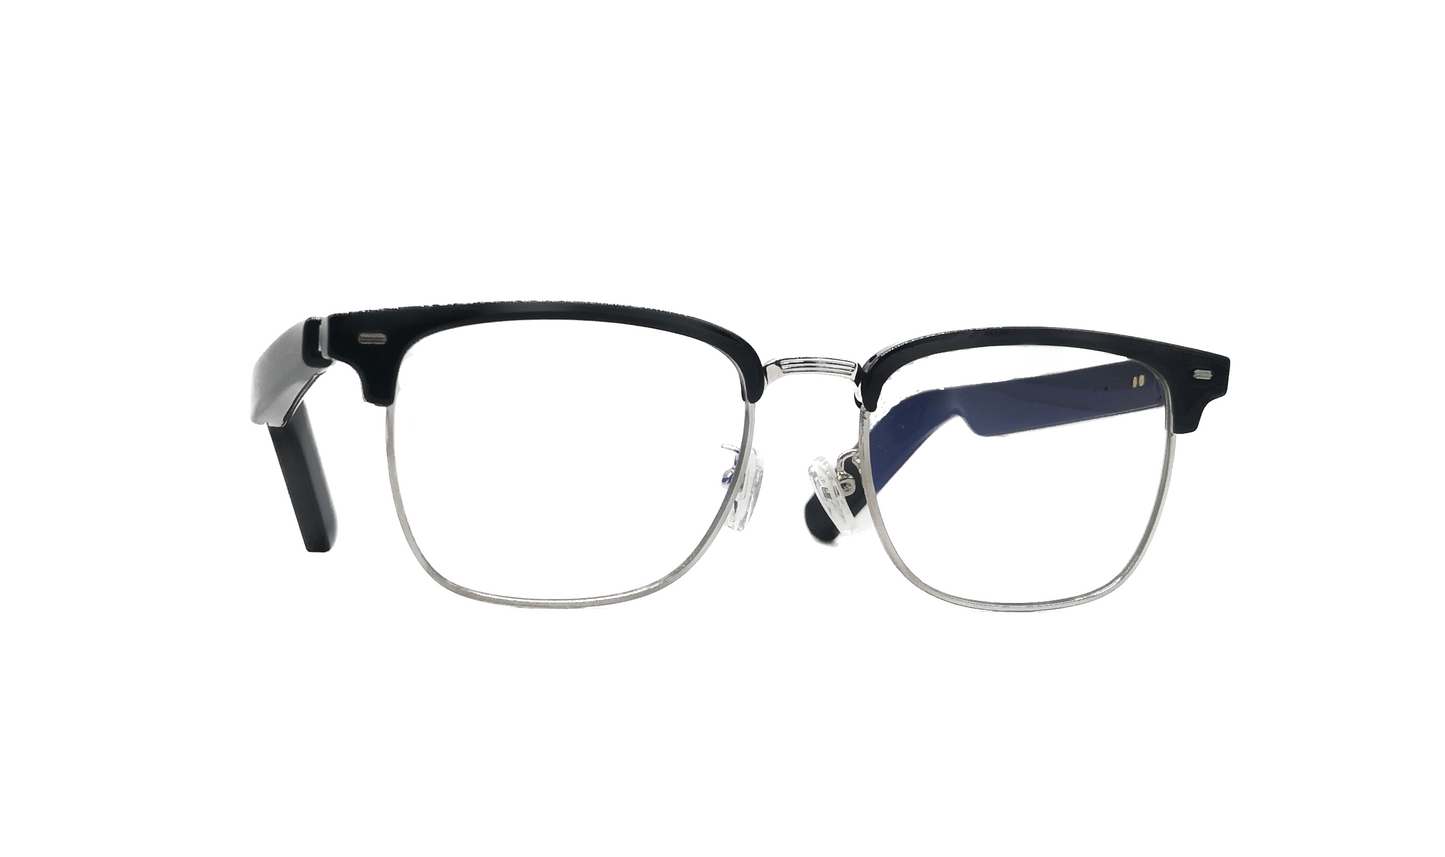 Spacely Smart Glasses